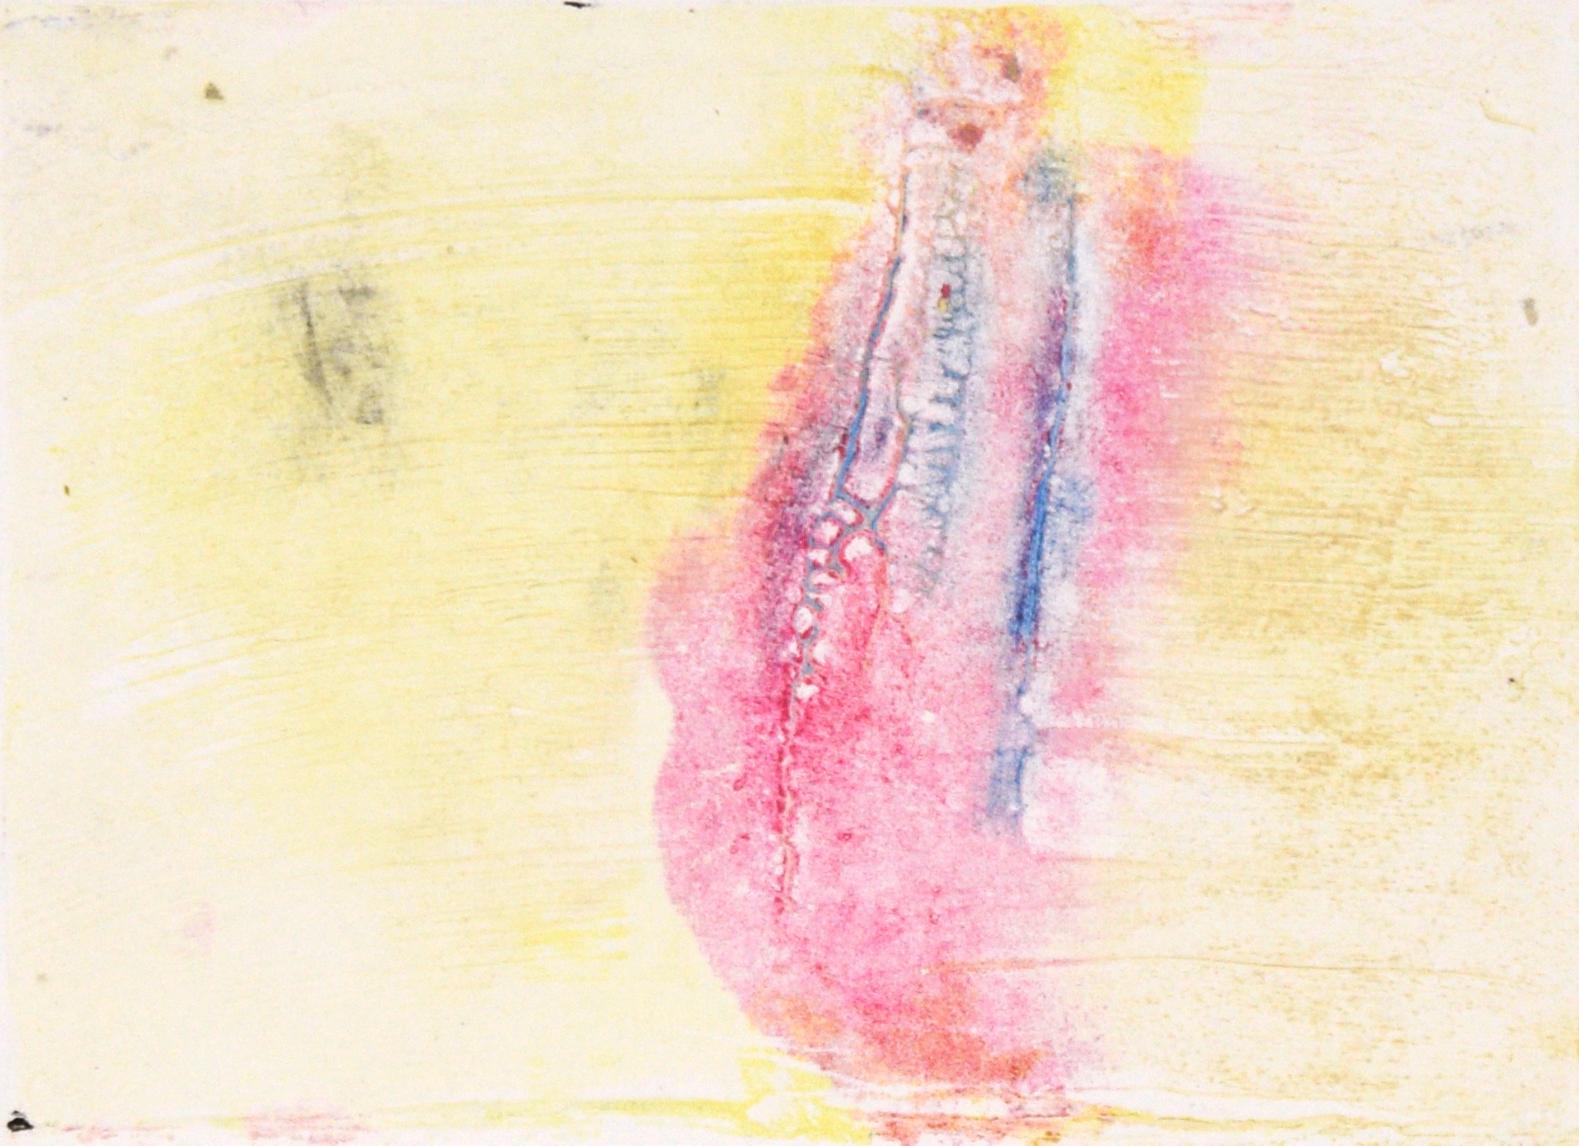 Blue and Pink on Yellow - Textured Transfer Monotype in Oil on Paper - Print by Heather Speck